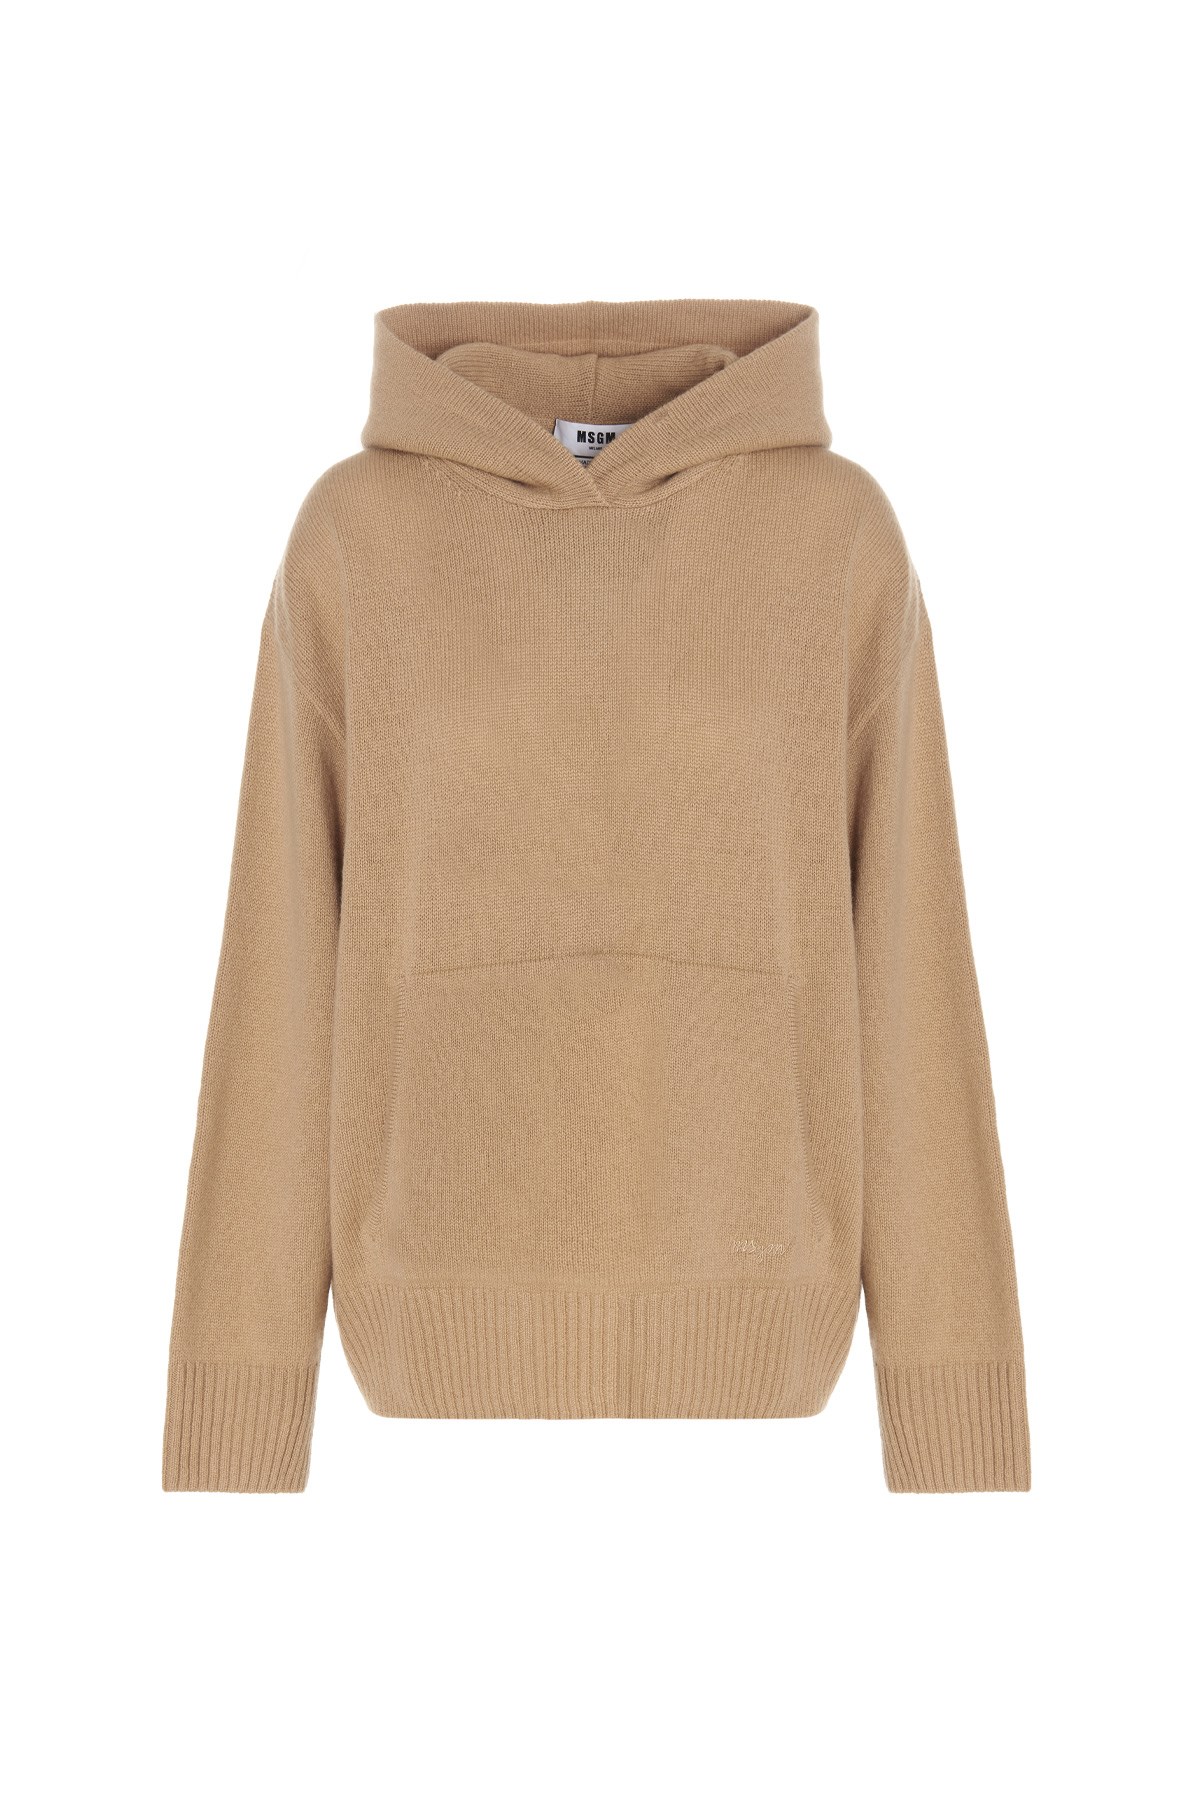 MSGM Cashmere Blend Hooded Sweater